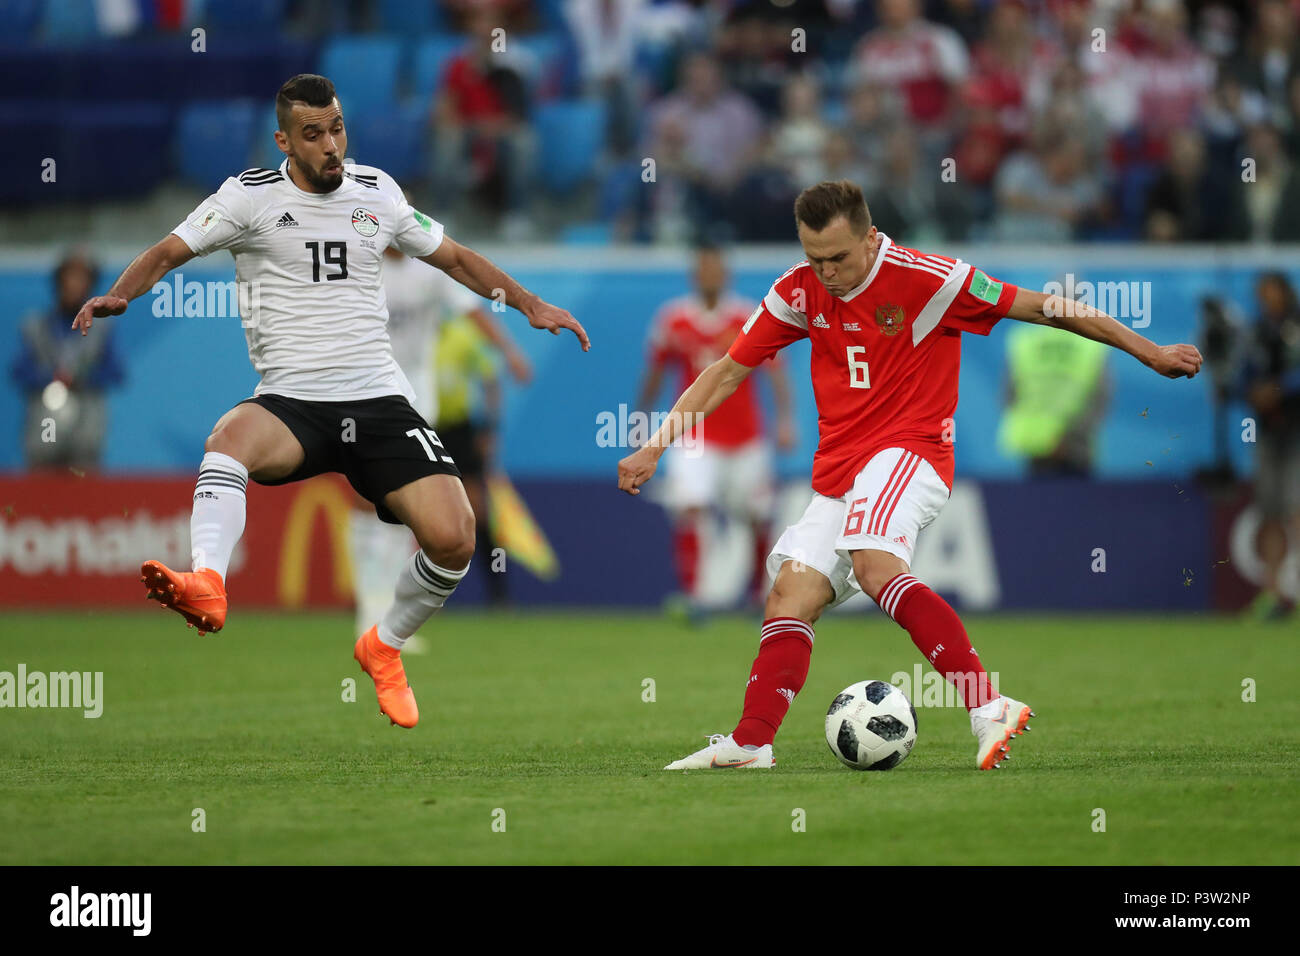 Saint Petersburg, Russia. 19th June, 2018. Egypt's Abdallah Said (L) and Russia's Denis Cheryshev in action during the FIFA World Cup 2018 Group A soccer match between Egypt and Russia, at the Saint Petersburg Stadium, in Saint Petersburg, Russia, 19 June 2018. Credit: Ahmed Ramadan/dpa/Alamy Live News Stock Photo